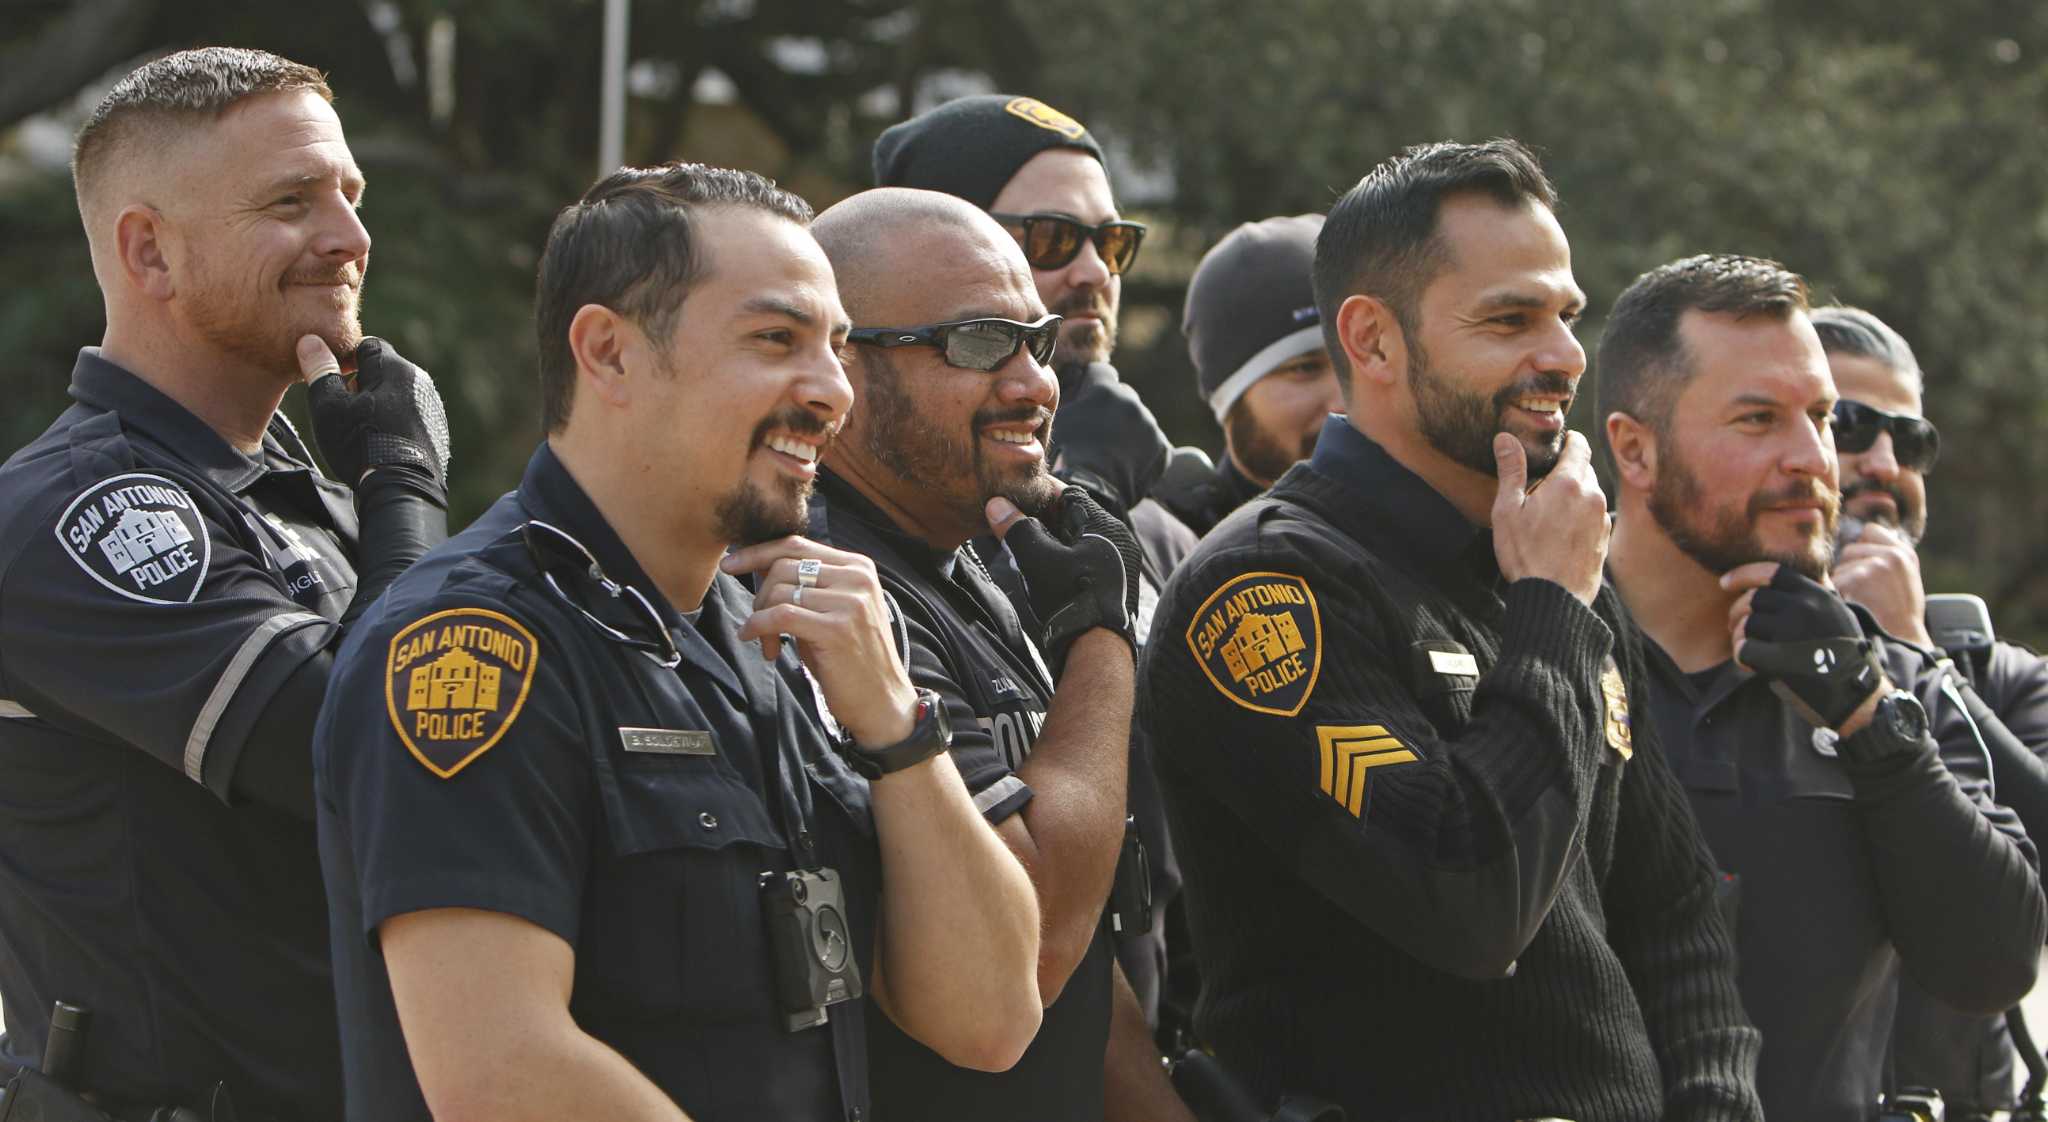 Allowing police beards is right move [Editorial]